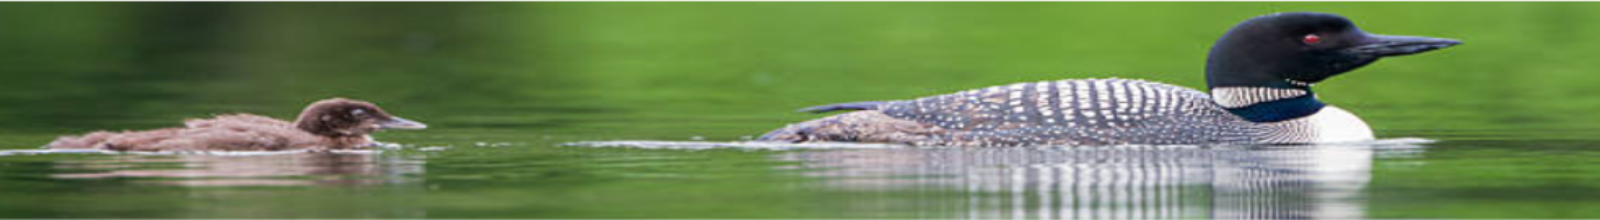 Mother loon with baby loon swimming behind her